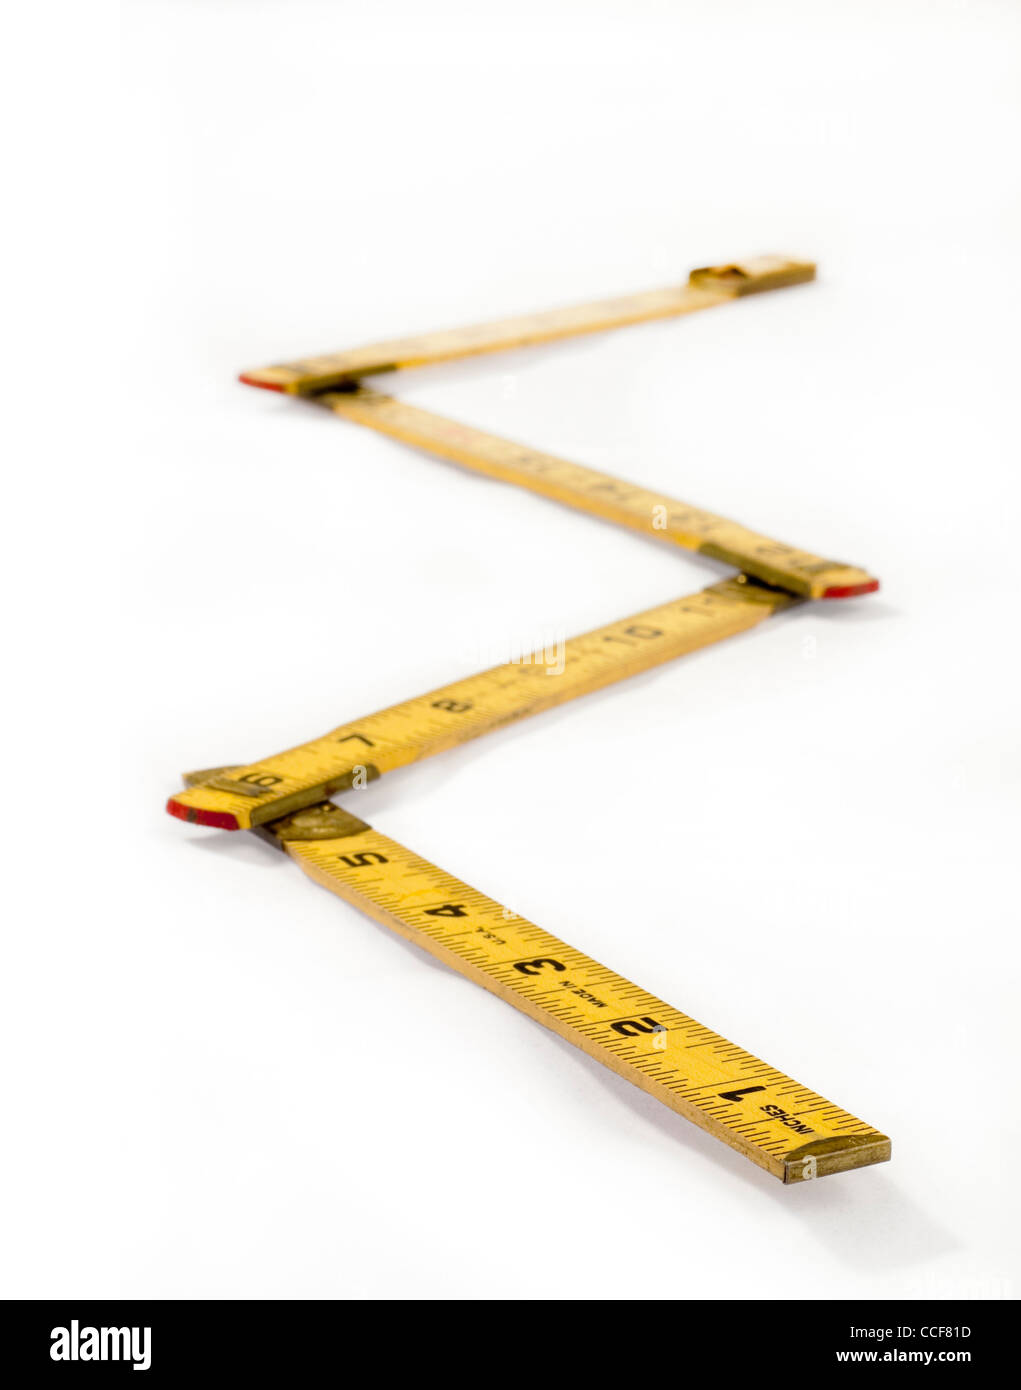 Ruler on a white background falling out of focus Stock Photo